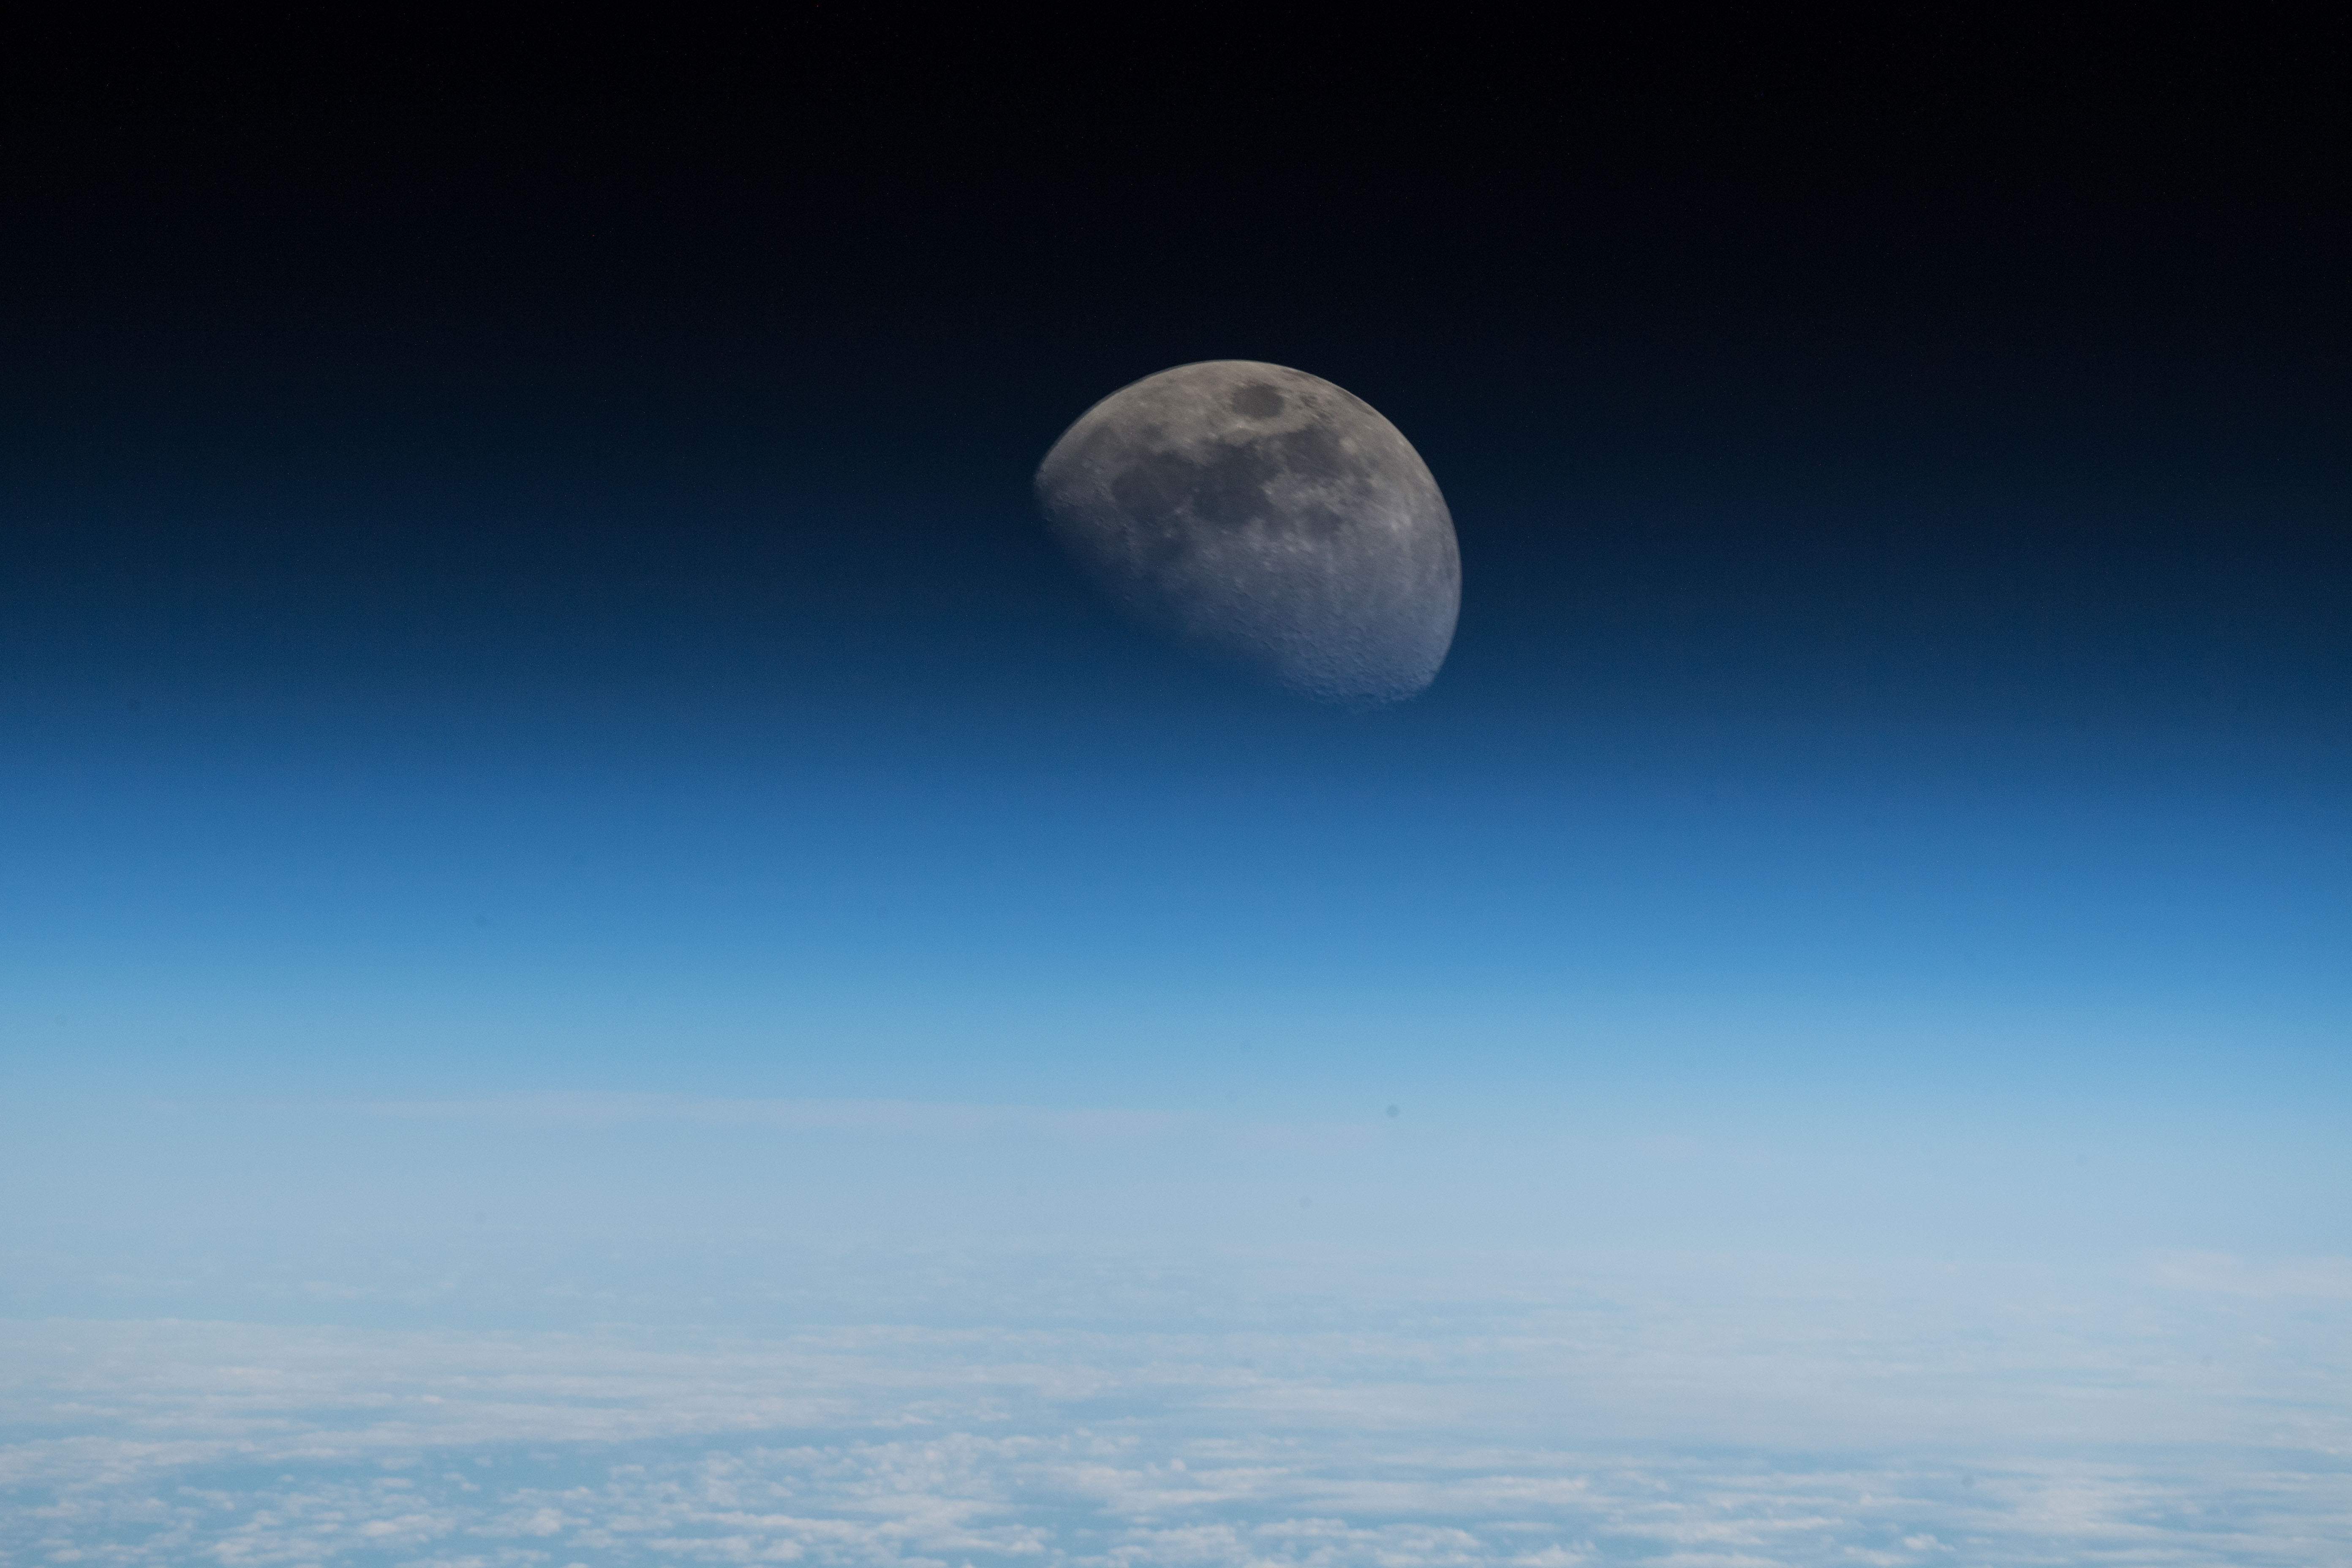 The Moon as seen from the ISS, shared by European Space Agency astronaut Alexander Gerst